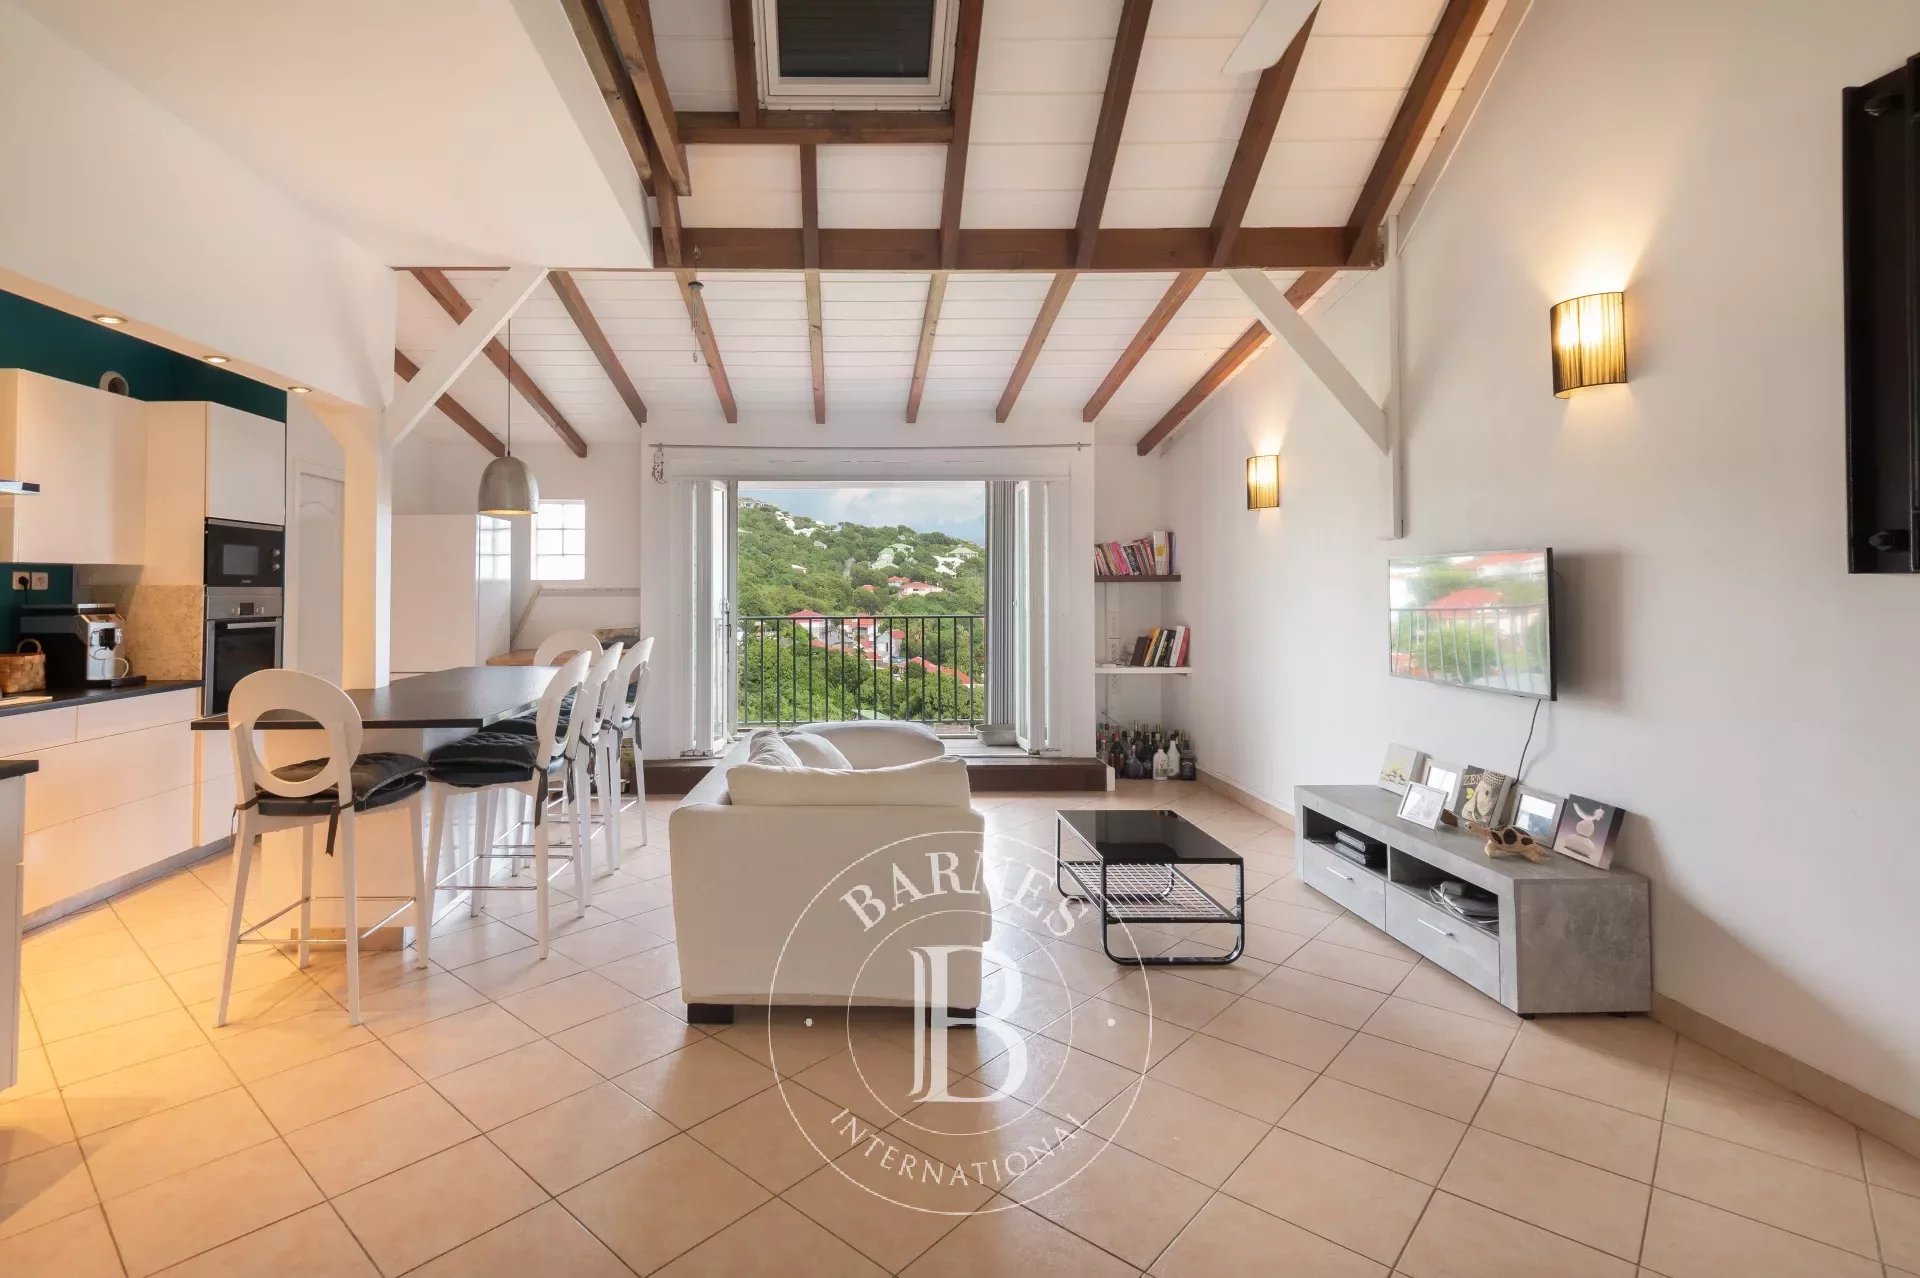 3 -Bedroom Flat in St.Barths